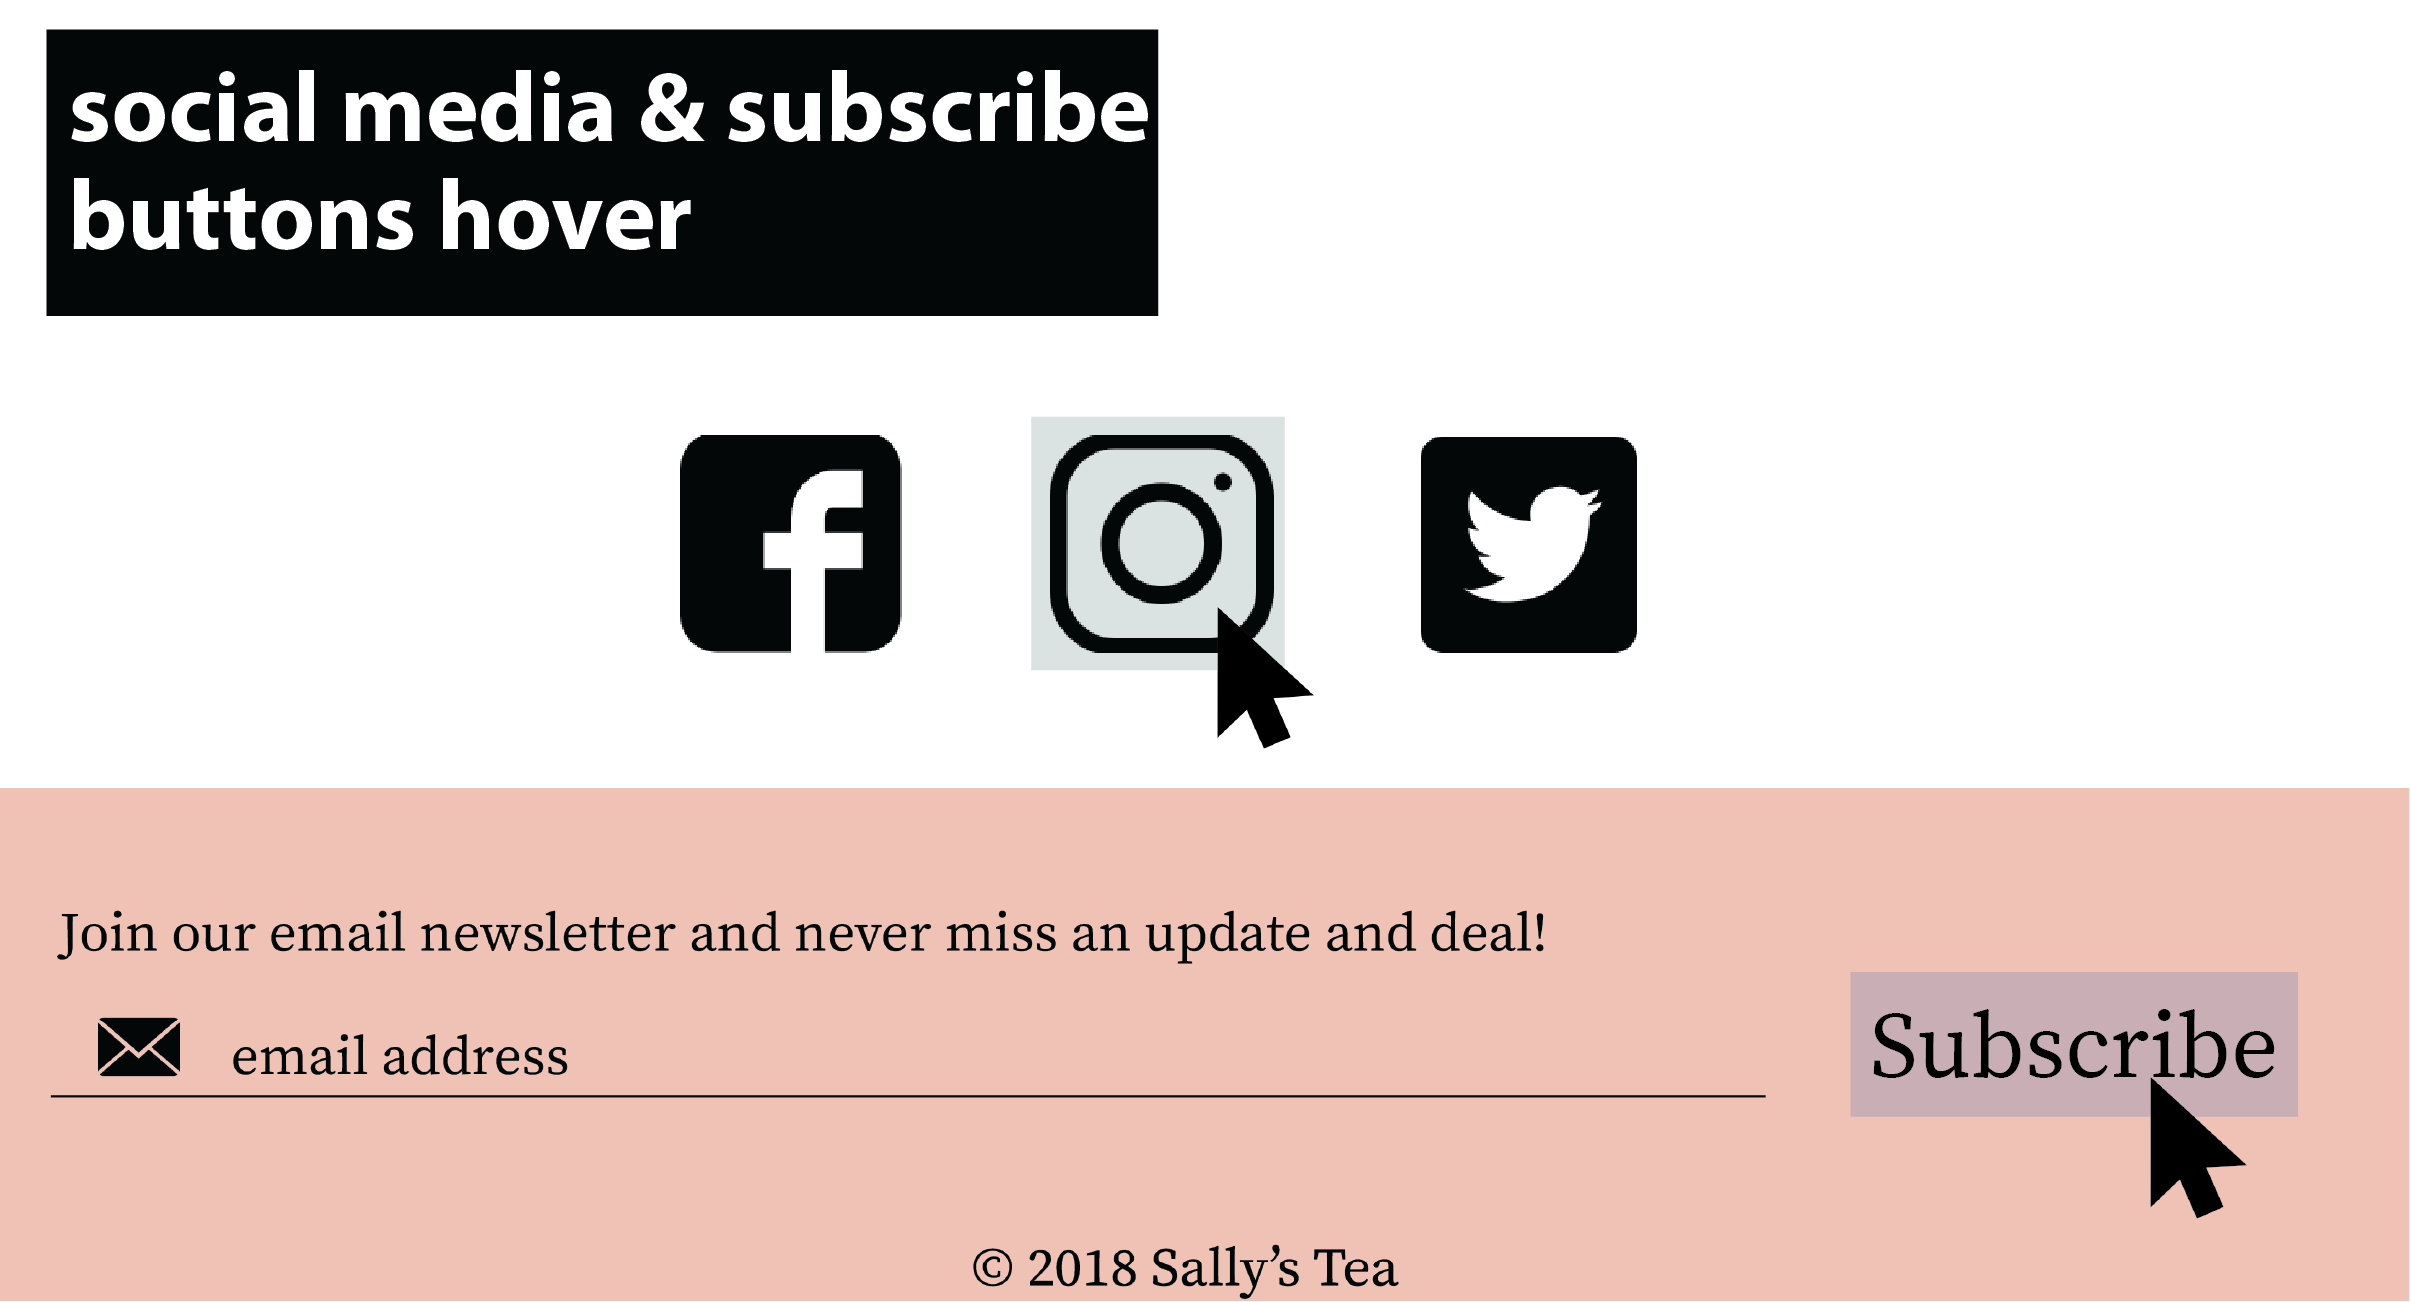 Social media and subscribe buttons hover